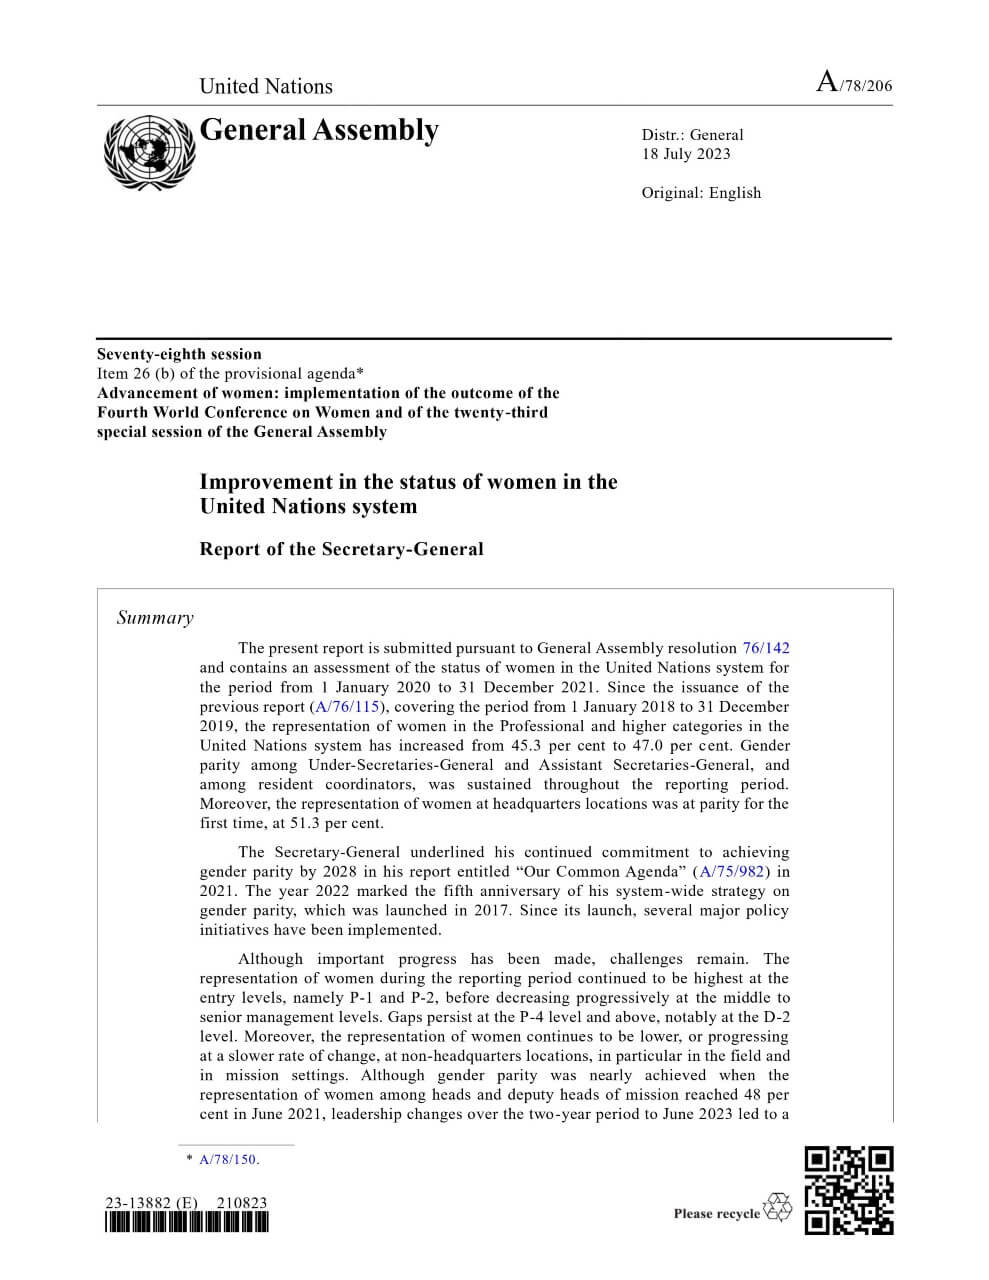 Improvement in the status of women in the United Nations system: Report of the Secretary-General (2023)